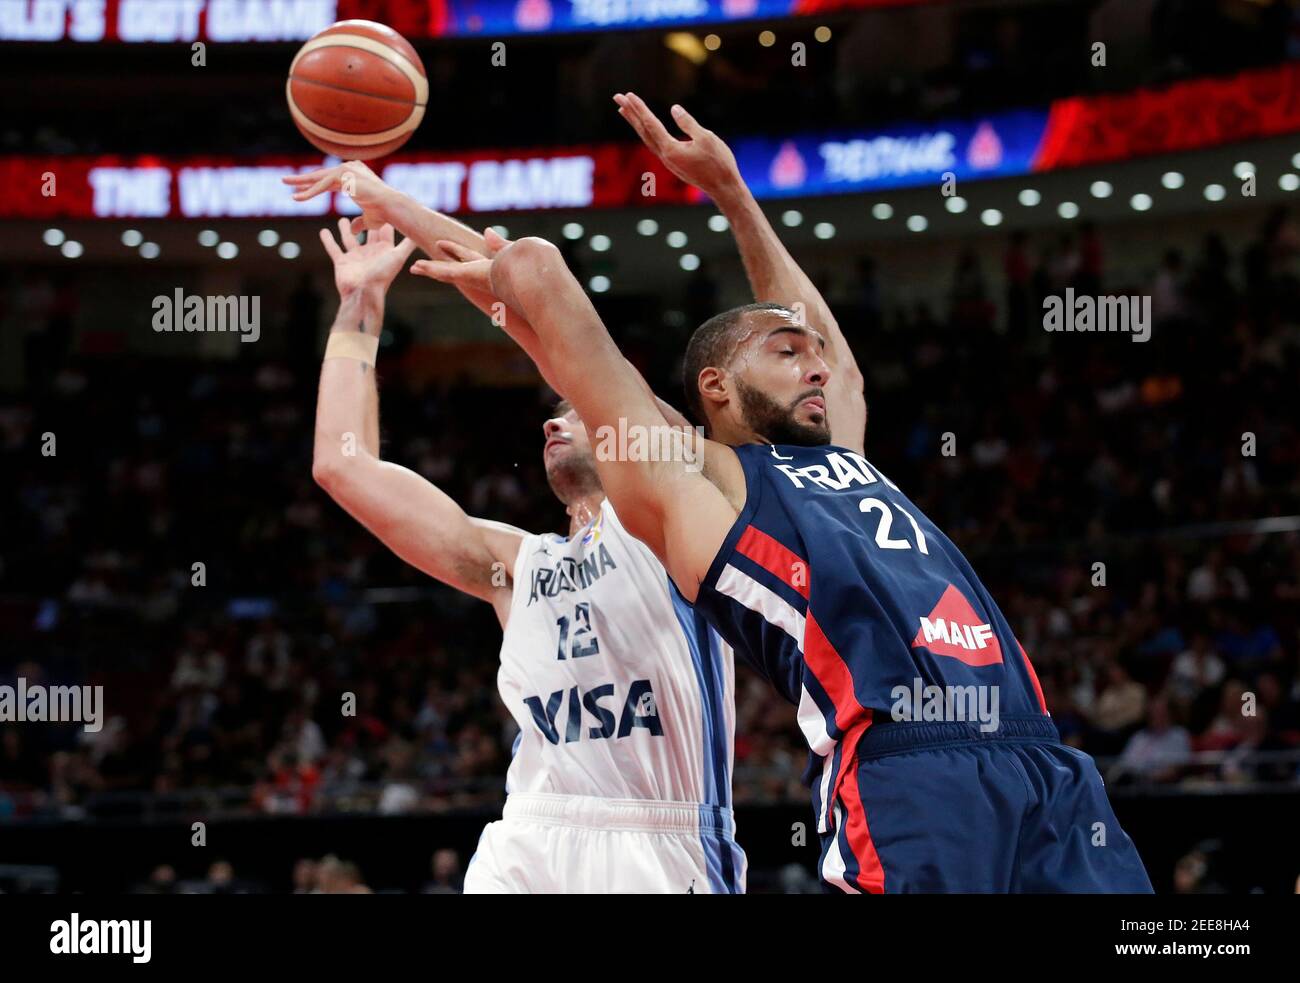 Basketball - FIBA World Cup - Semi Finals - Argentina v France - Wukesong Sport Arena, Beijing, China - September 13, 2019 Argentina's Marcos Delia in action with France's Rudy Gobert REUTERS/Jason Lee Stock Photo